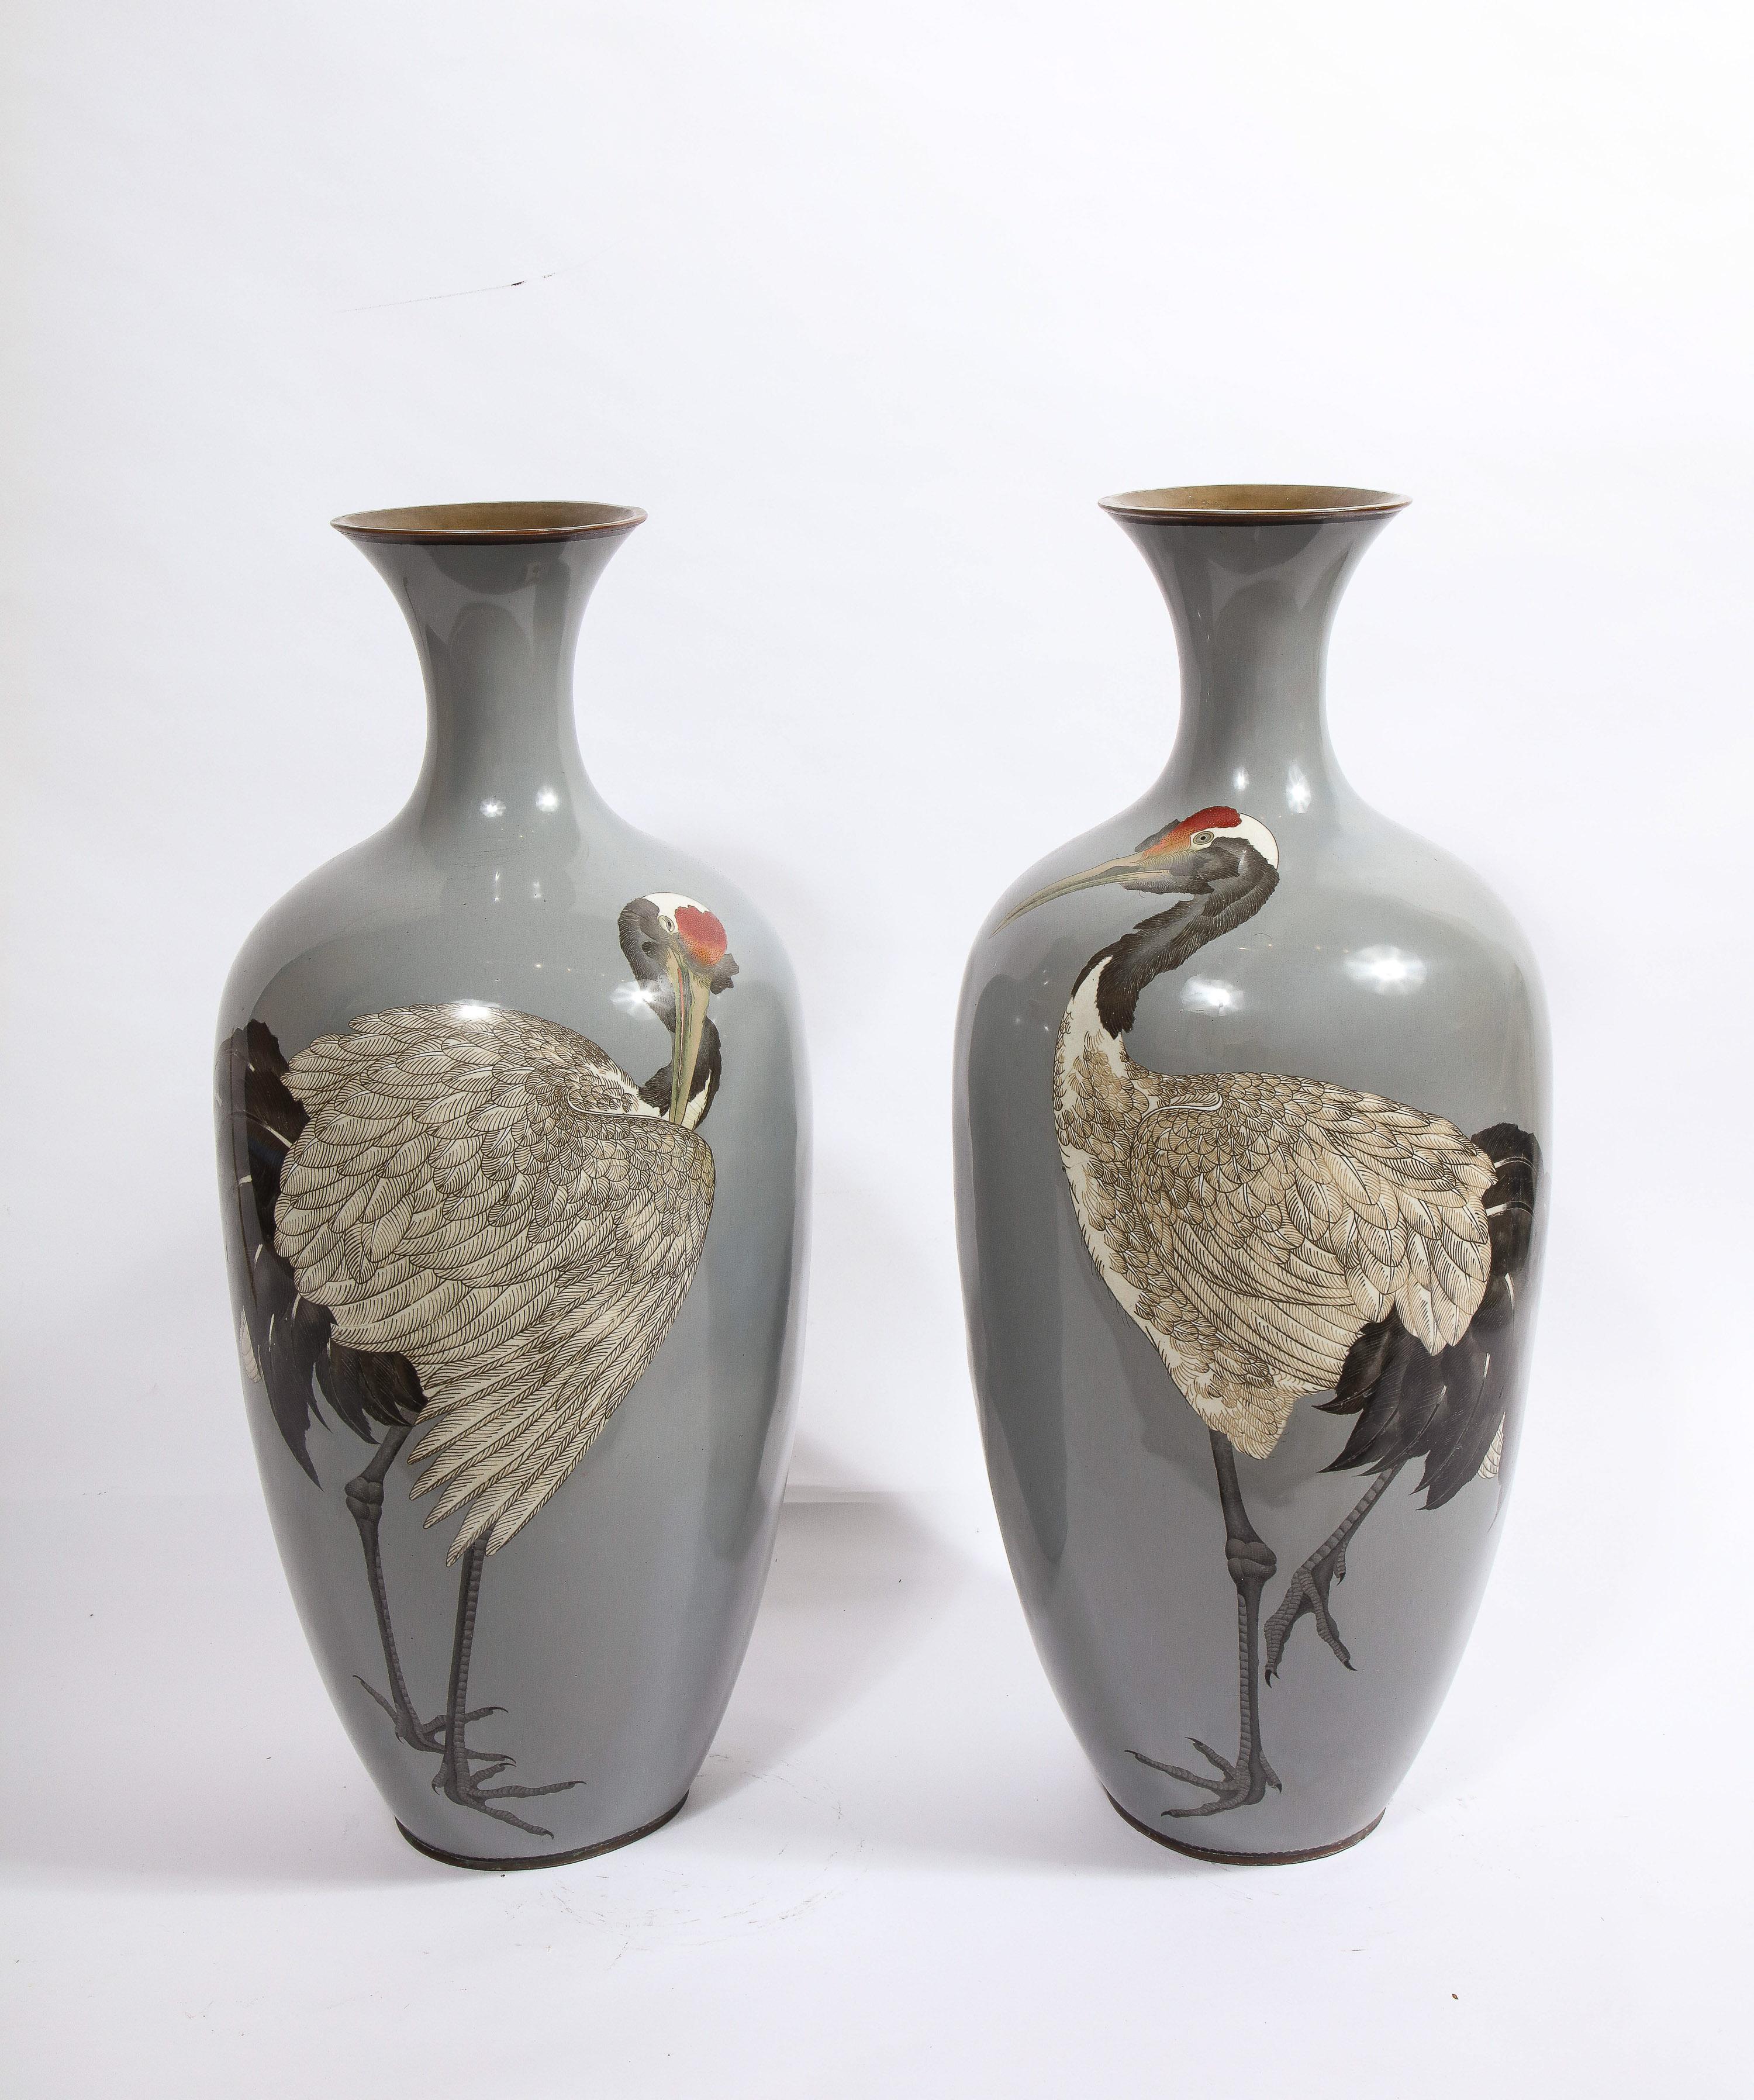 A Large Pair of Japanese Meiji Period Cloisonne Enamel vases with cranes.

Attributed to Hayashi Chuzo, this magnificent pair of vases are prime examples of Chuzo's workmanship. The quality of the enameled cranes, and the simplicity of form,